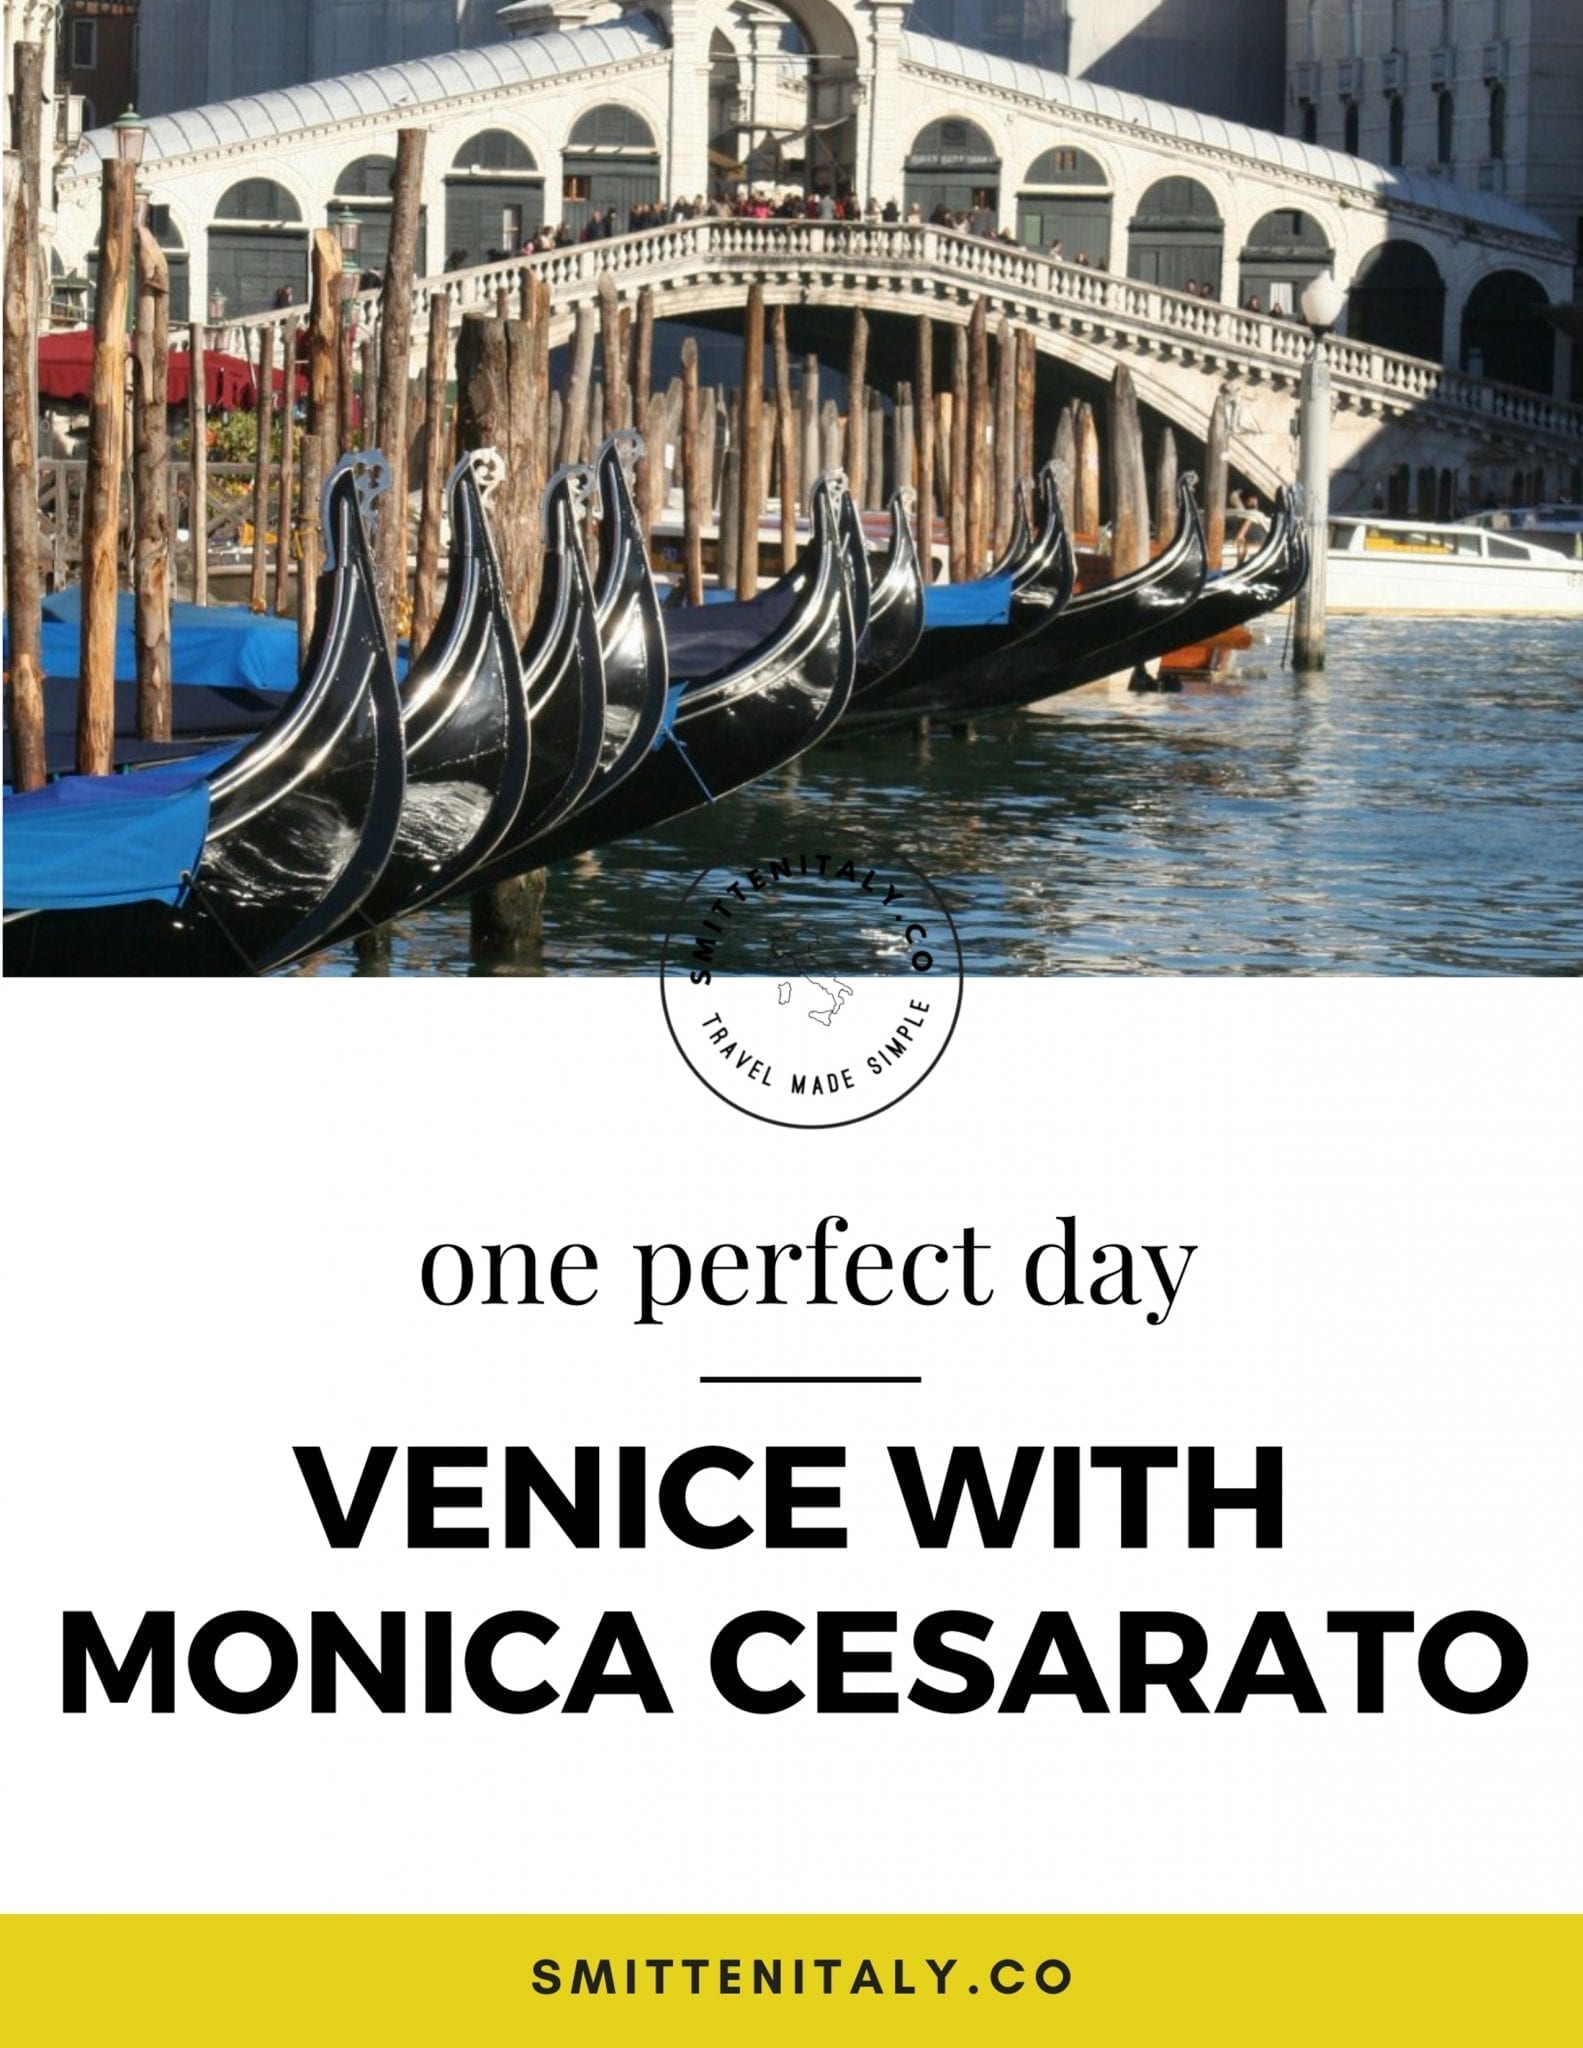 One Perfect Day Travel Guides: Venice with Monica Cesarato